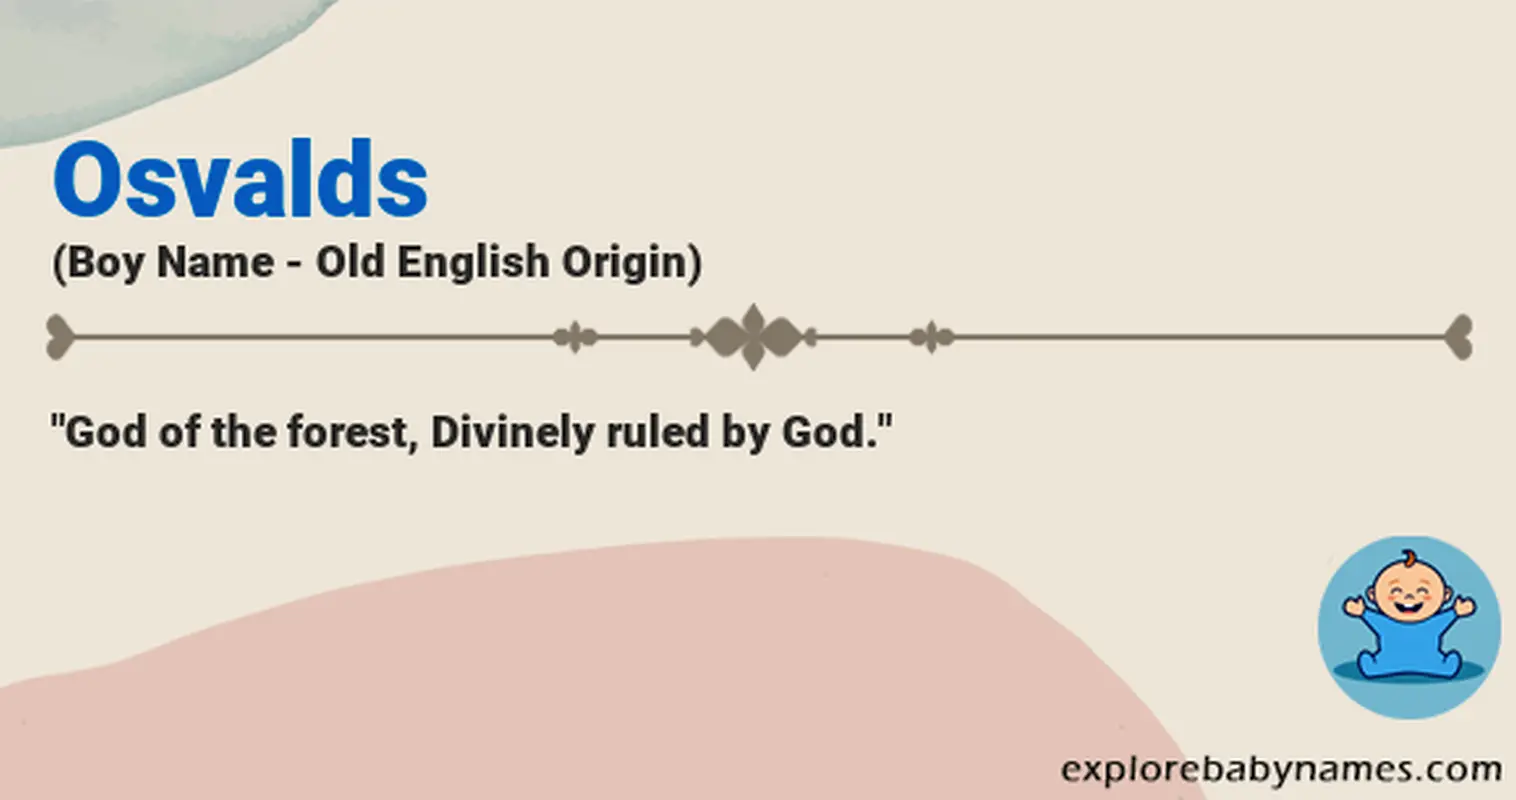 Meaning of Osvalds